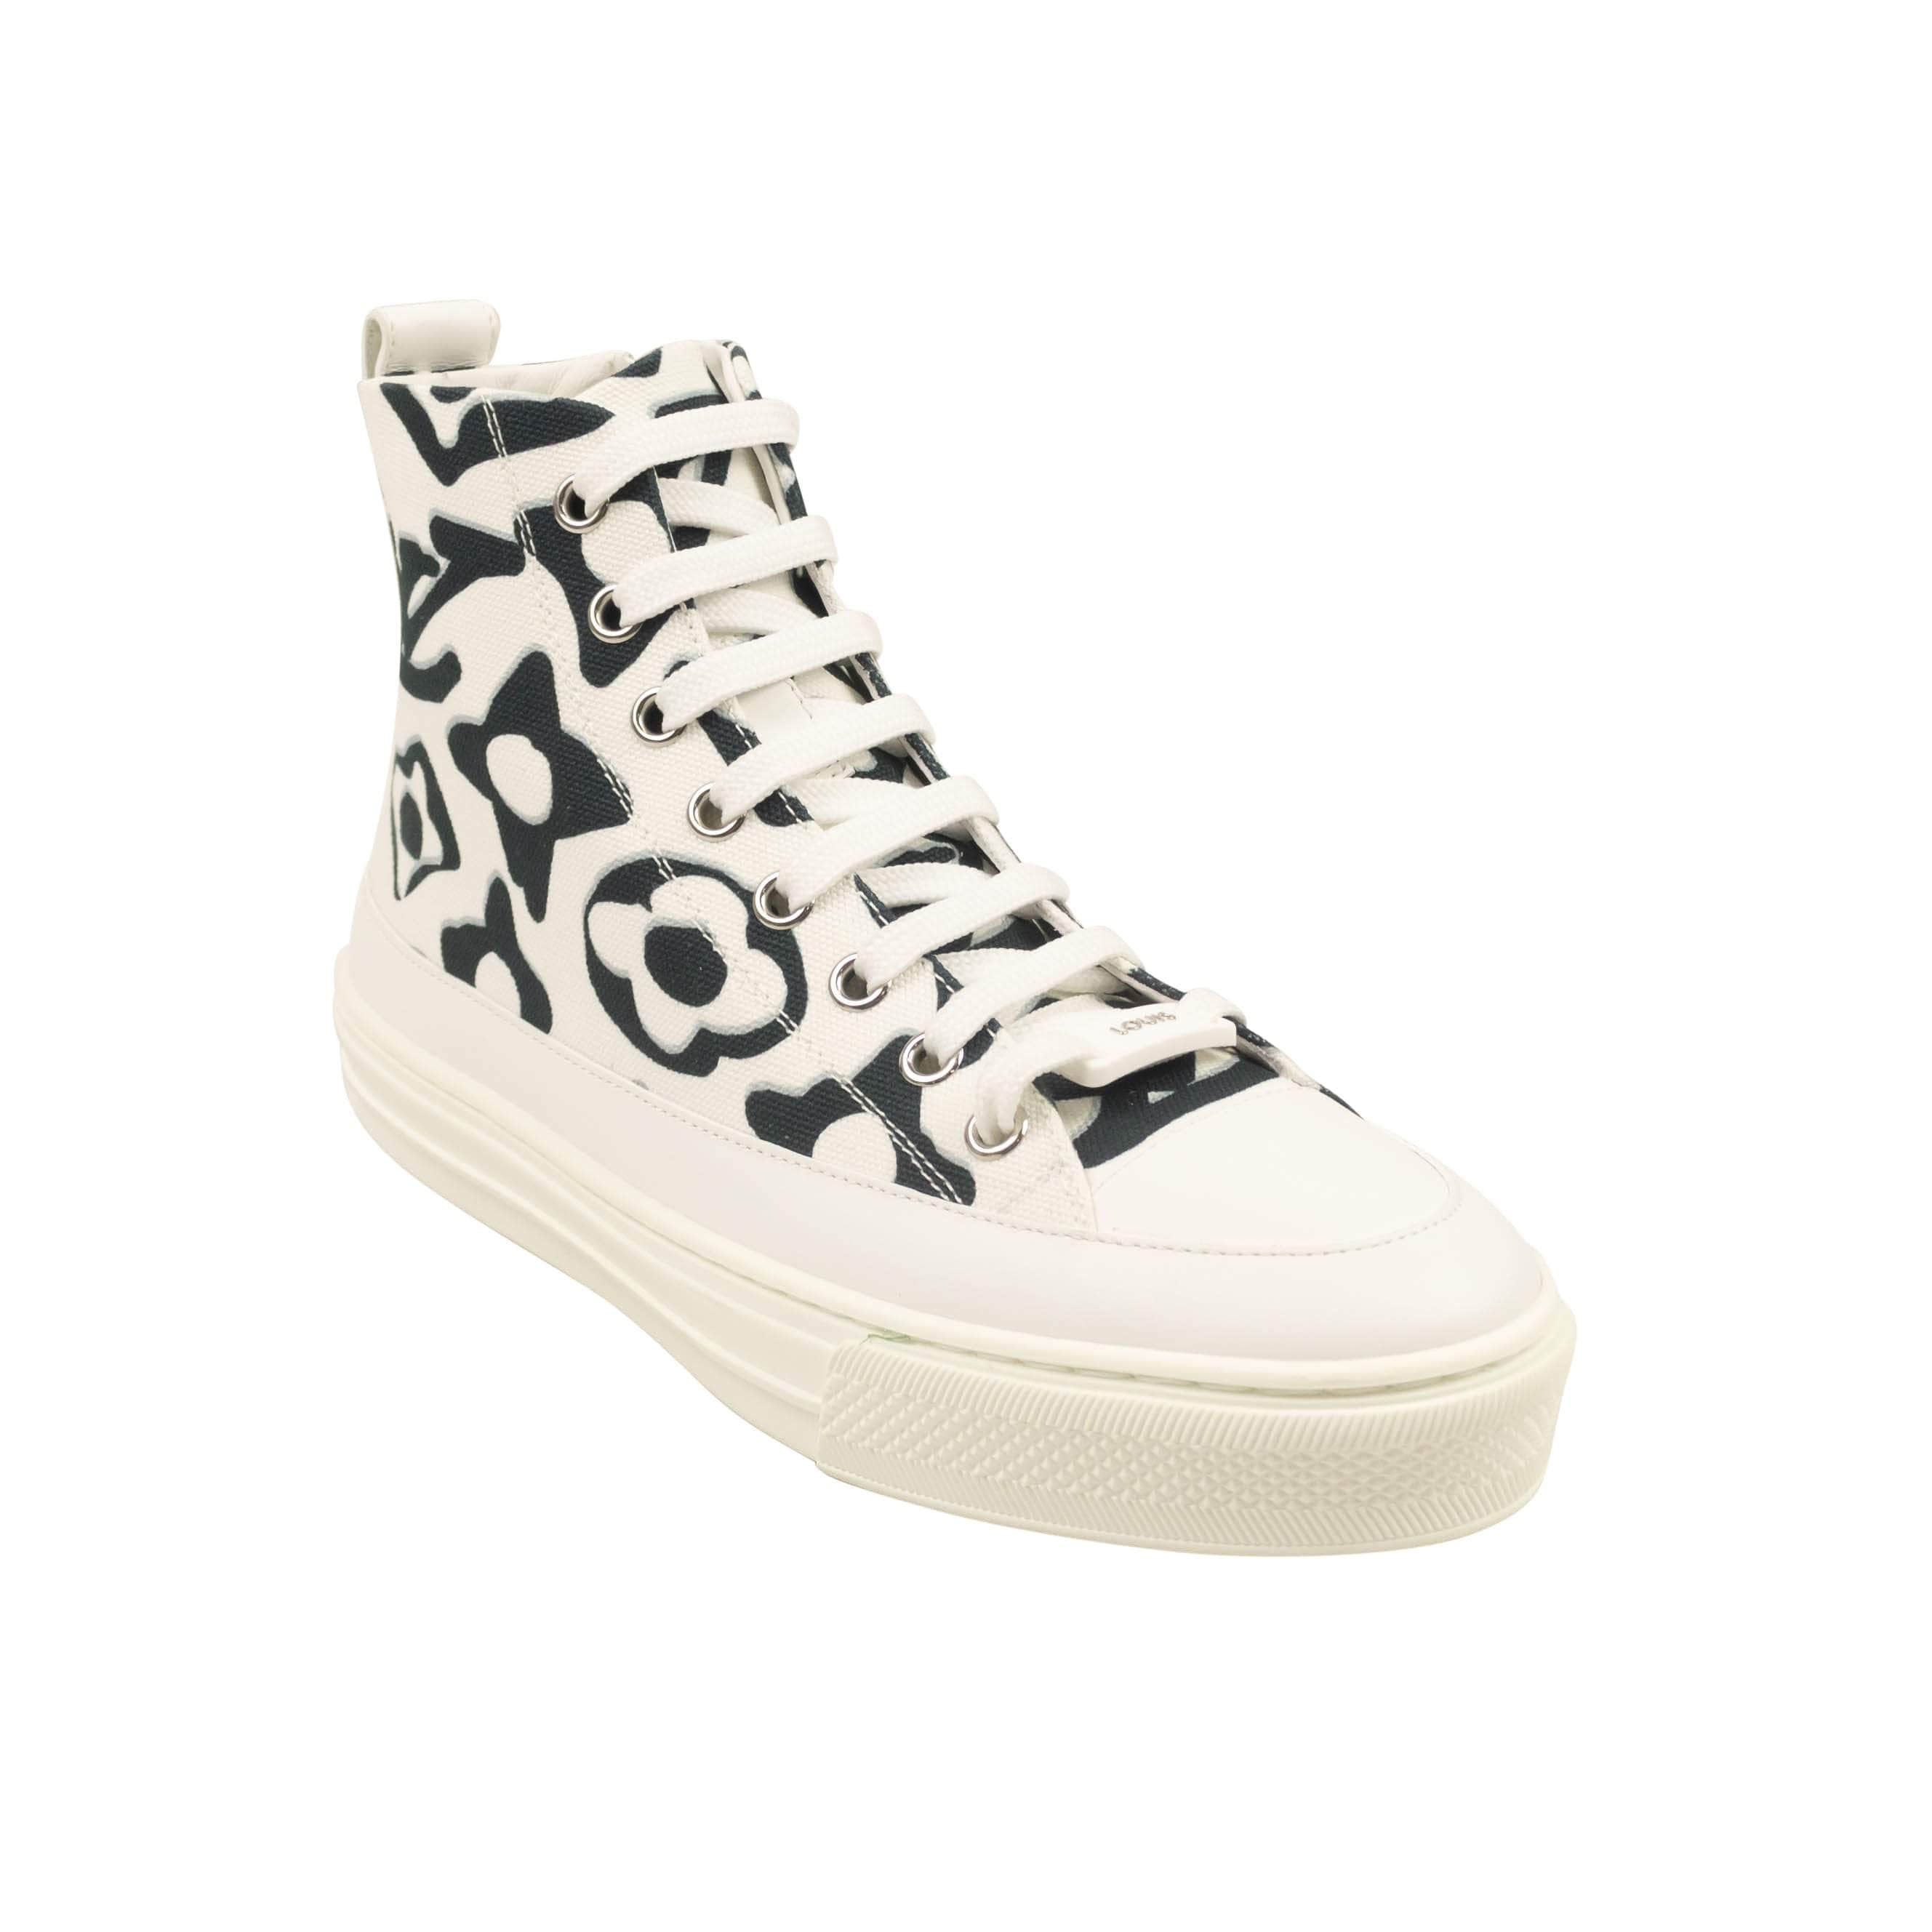 Louis Vuitton 250-500, channelenable-all, chicmi, couponcollection, gender-womens, main-shoes, size-34-5, size-35, SPO, stadiumgoods White Urs Fischer Stellar High Top Sneakers